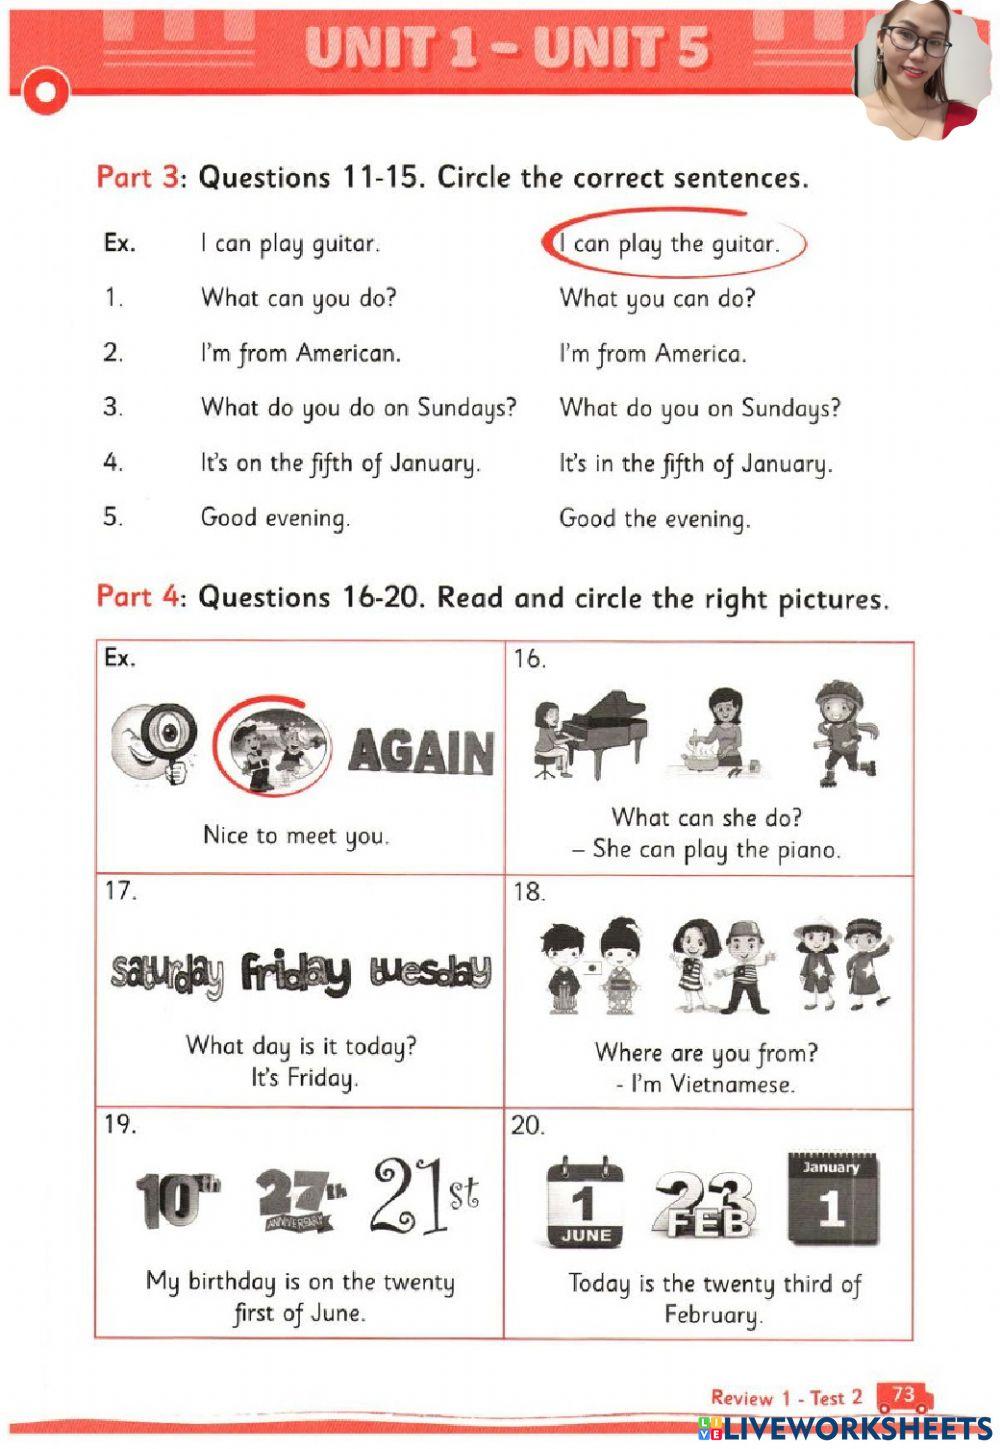 G4-big 4-review 1-test 2- P2